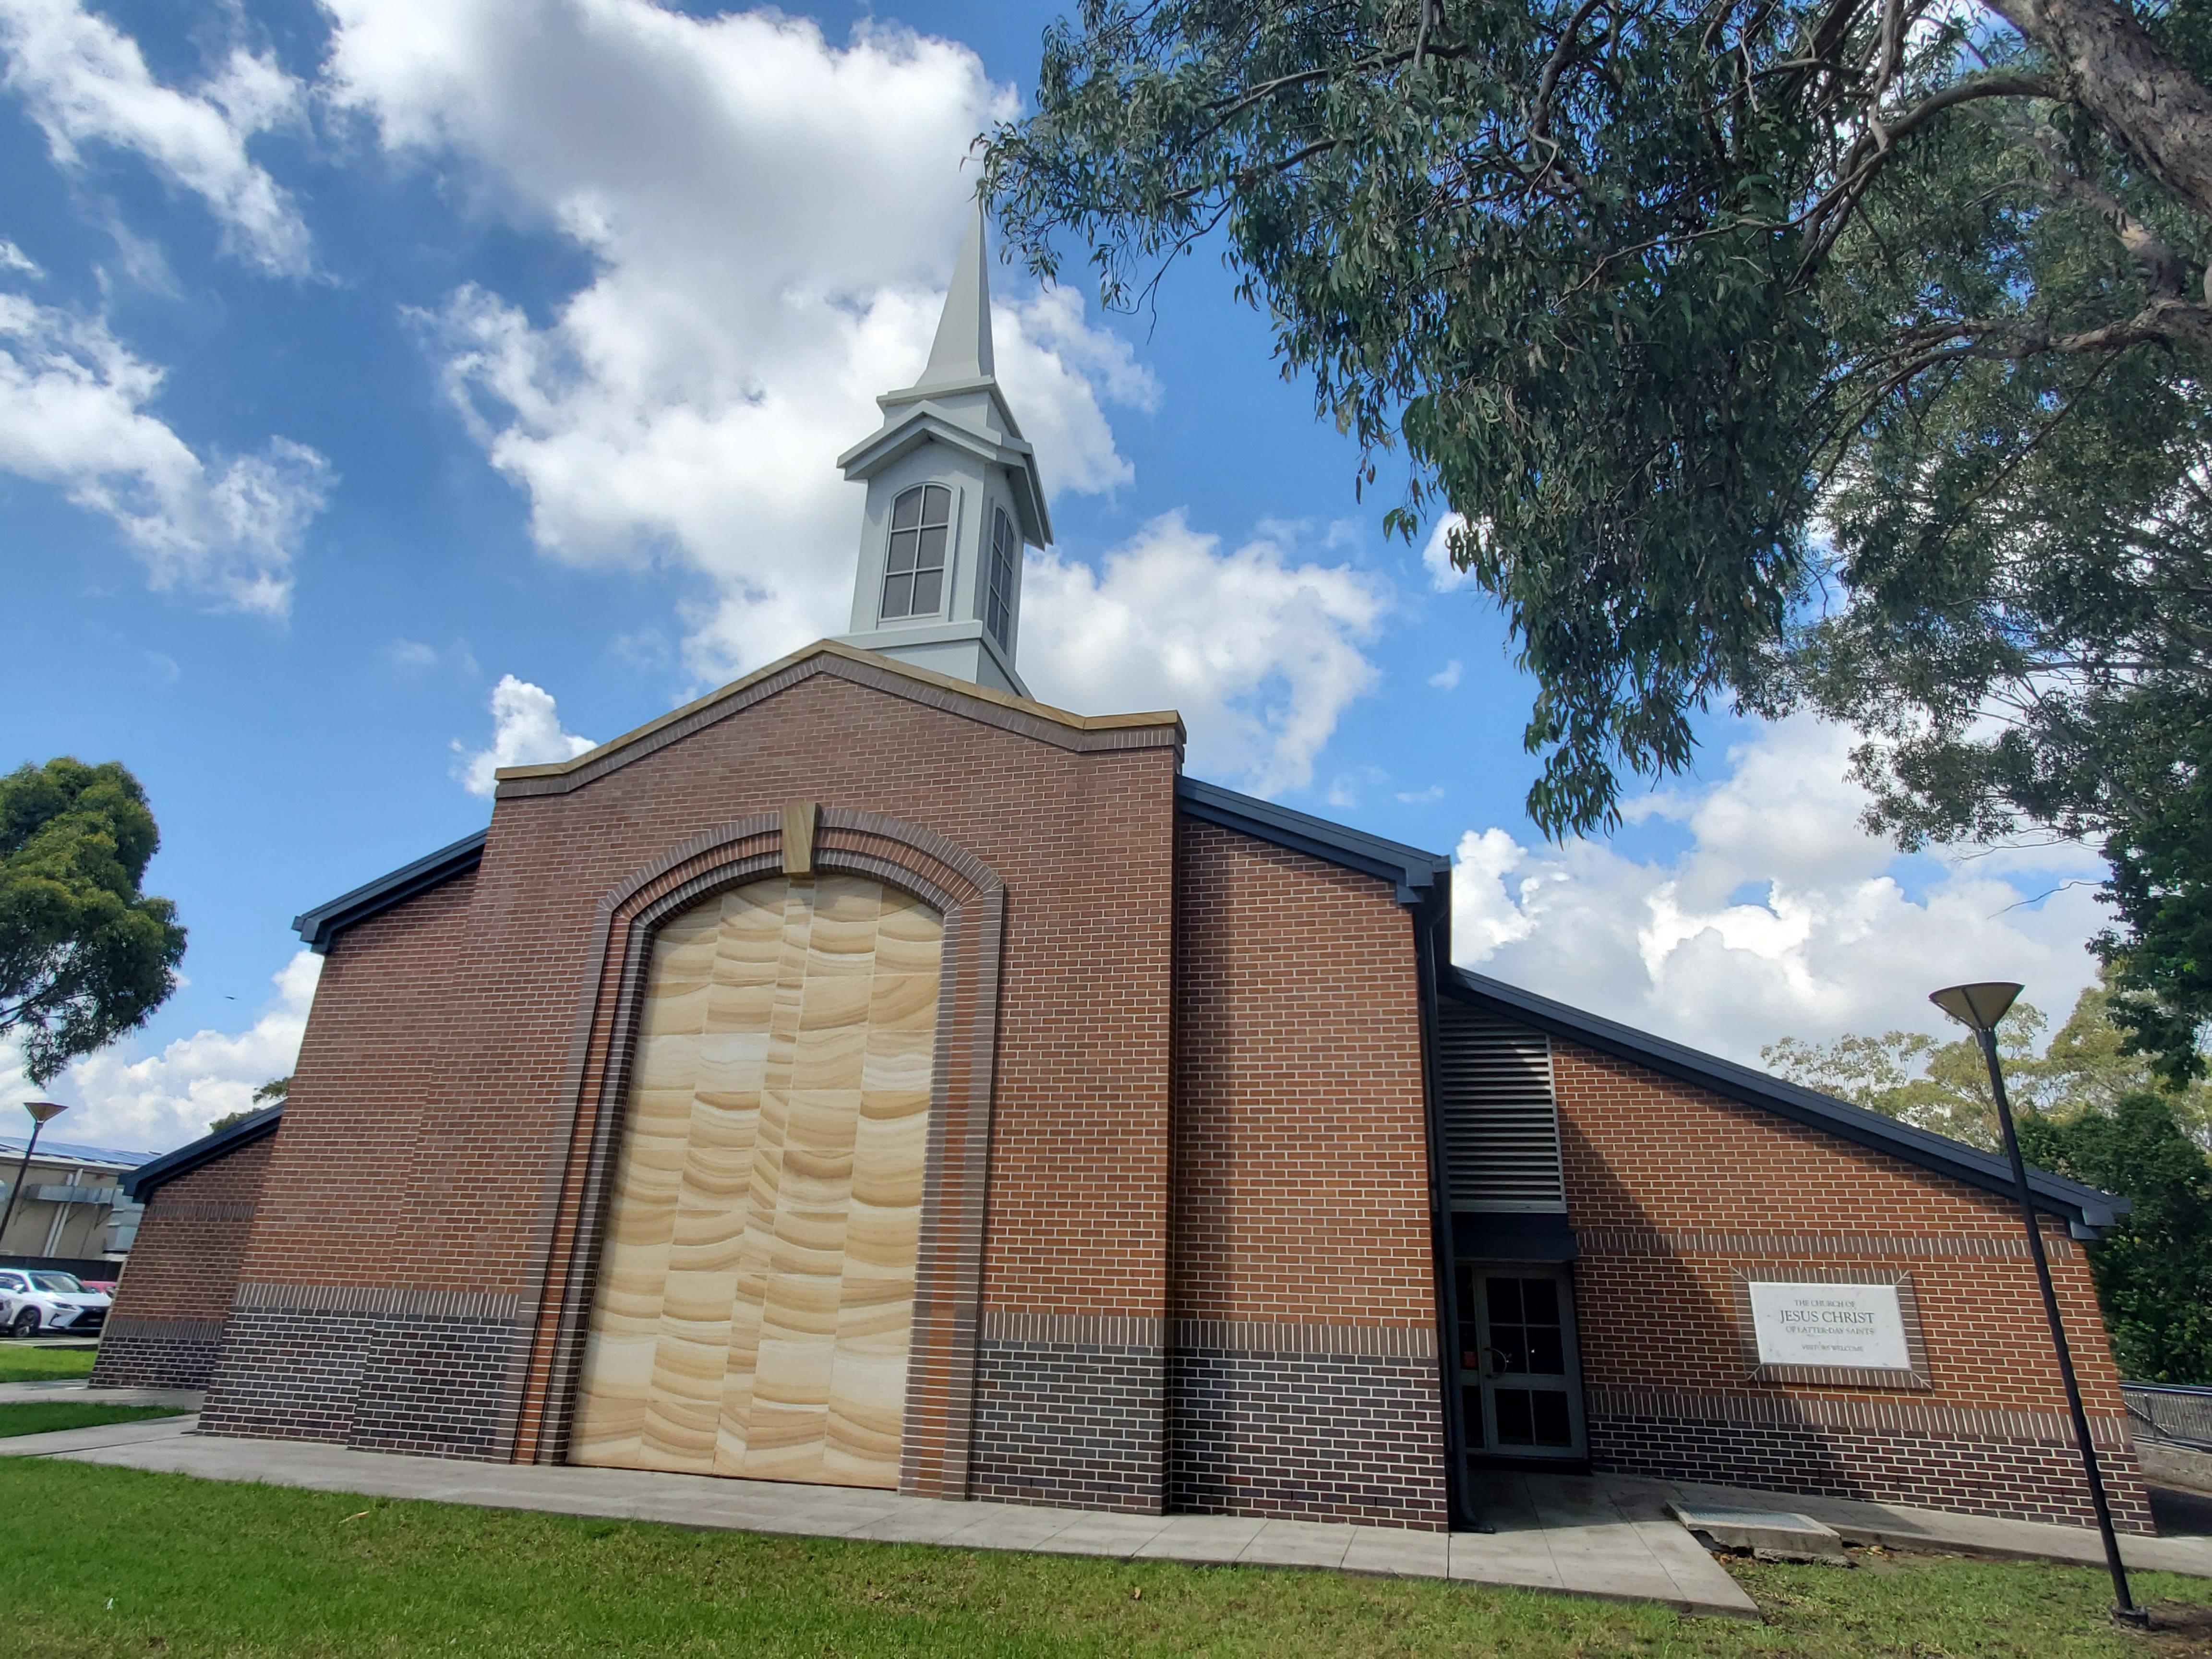 The Church of Jesus Christ of Latter-day Saints Villawood 0415 887 805